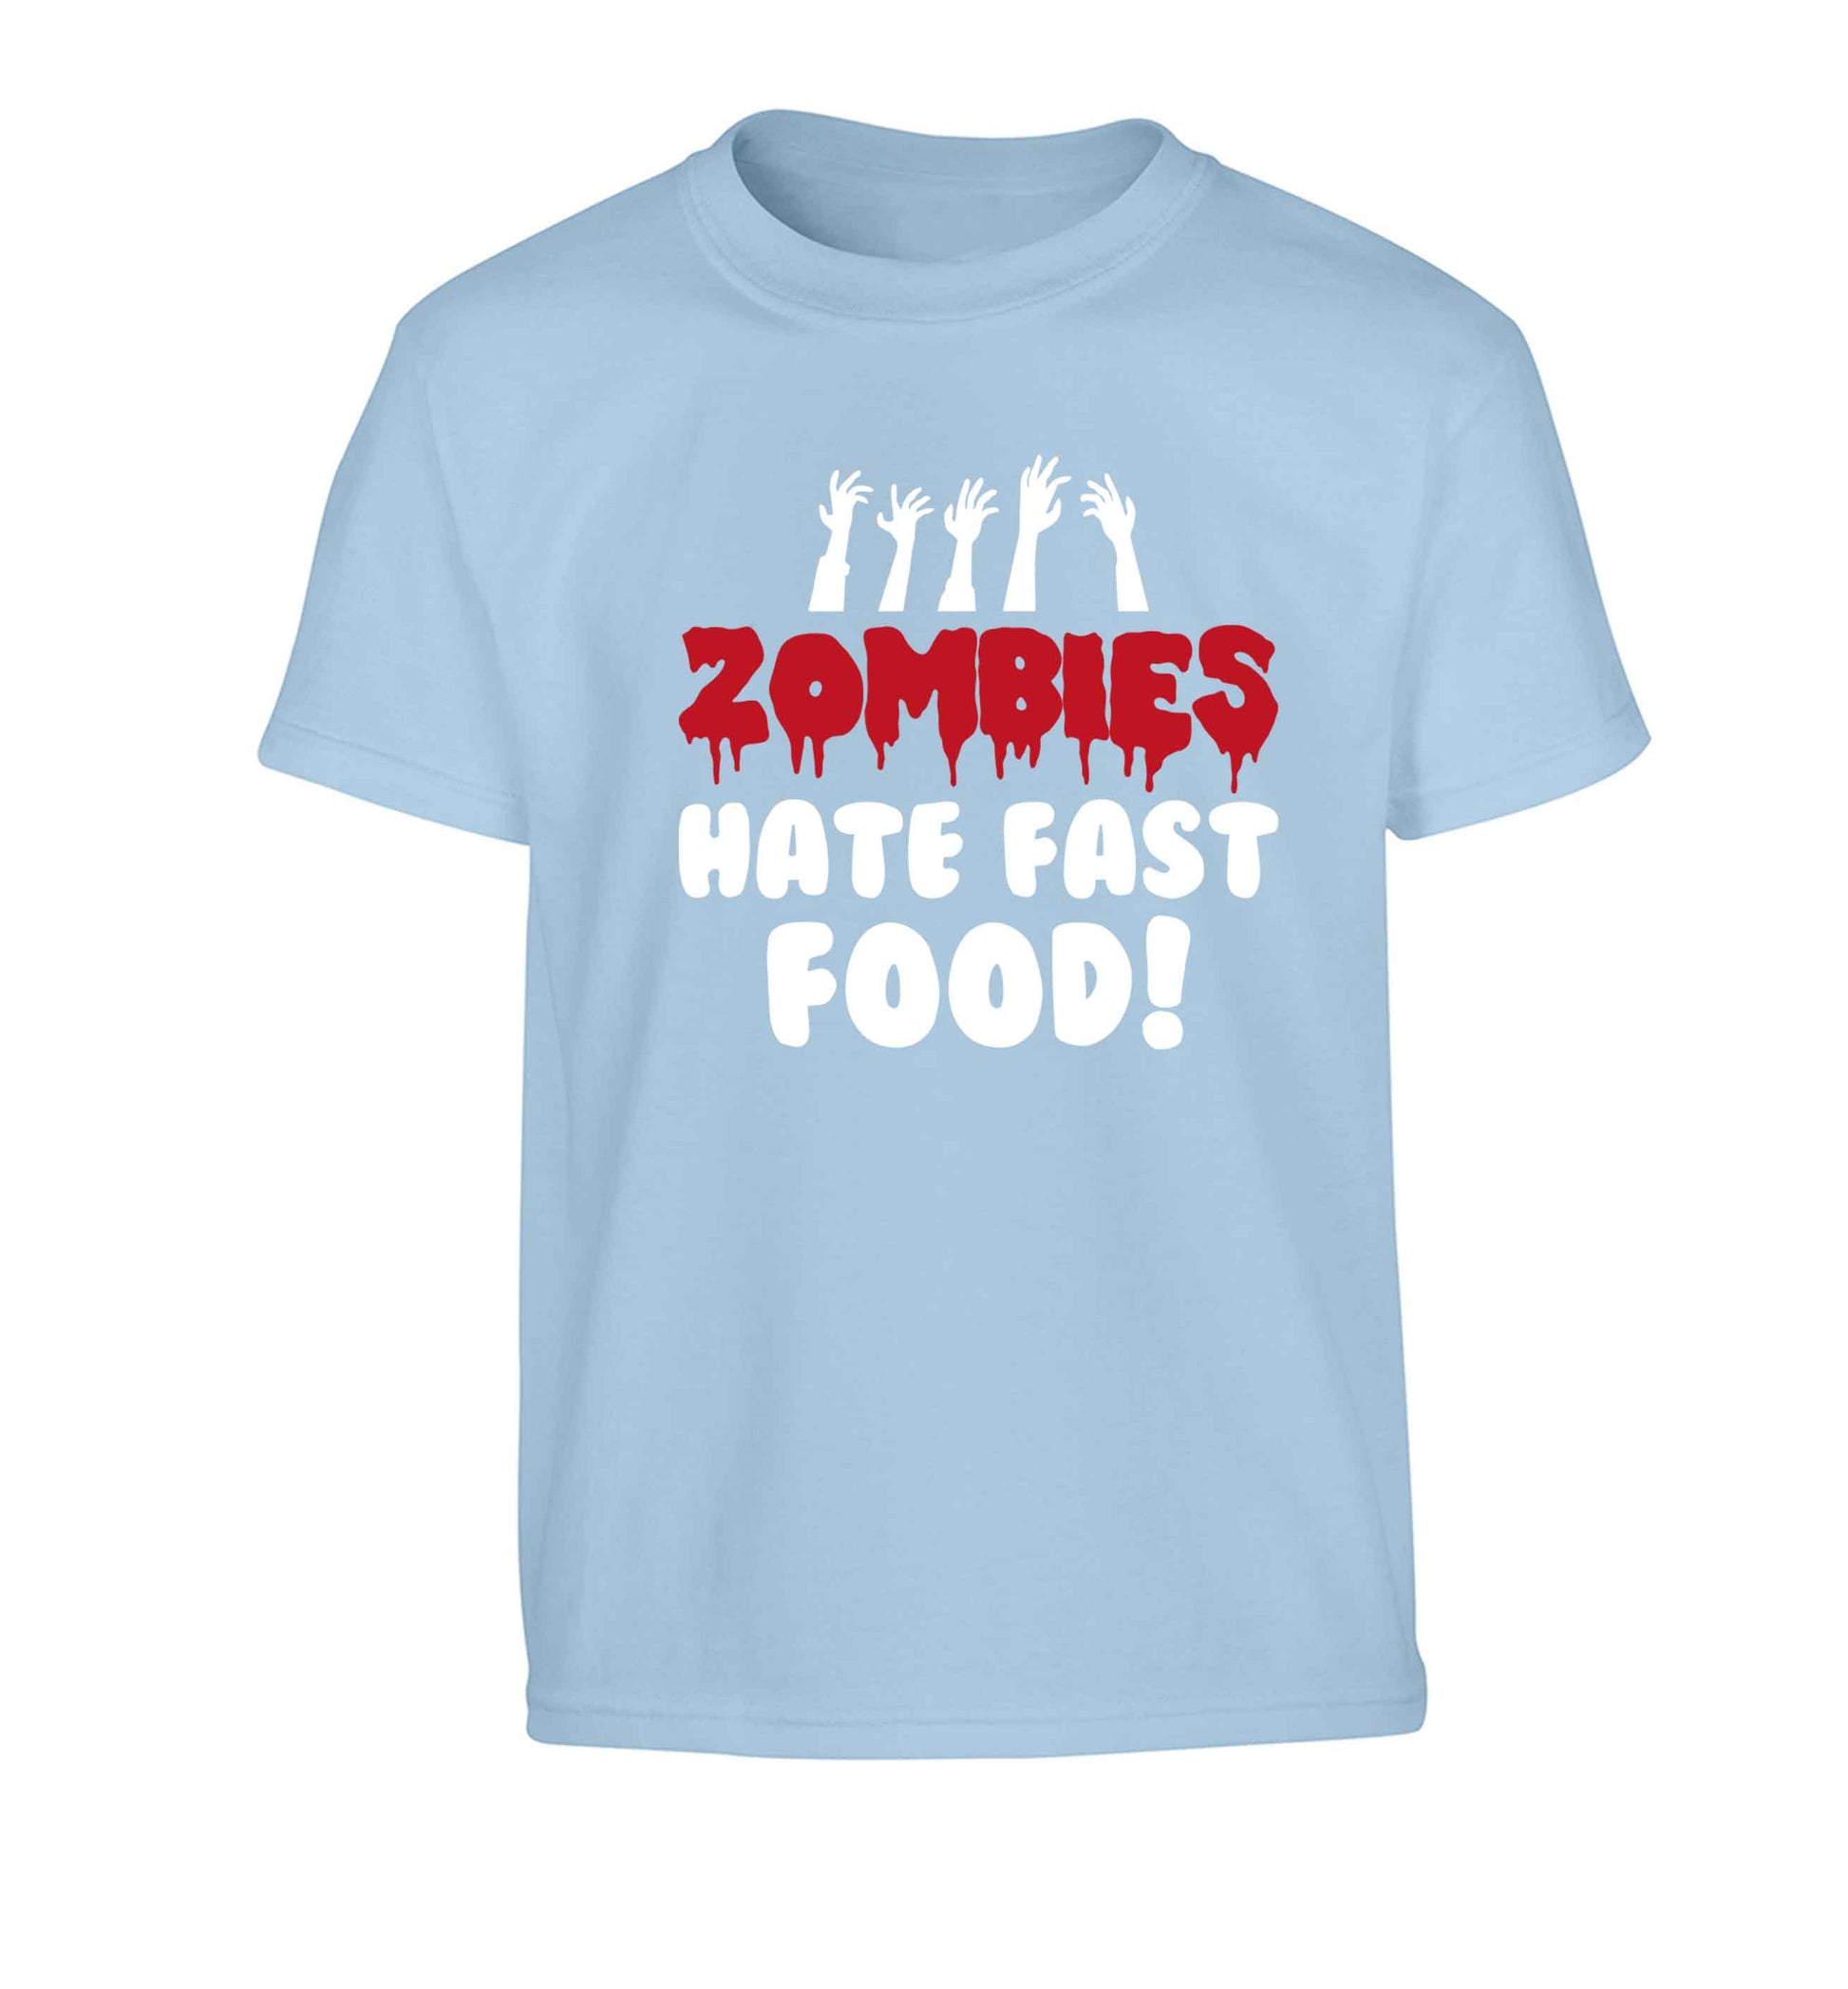 Zombies hate fast food Children's light blue Tshirt 12-13 Years